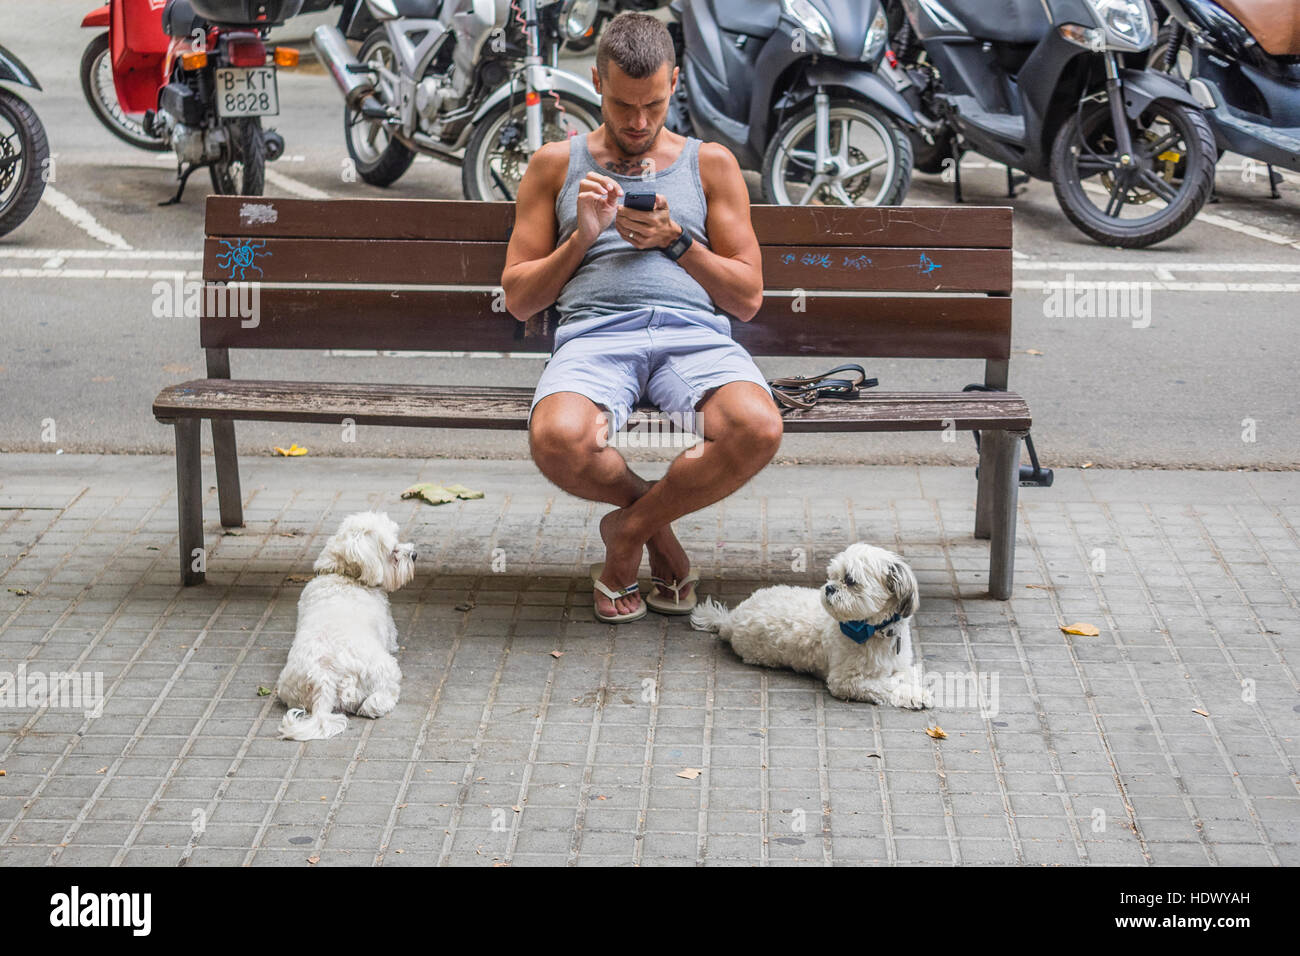 A 20s Spanish male sits on a city bench on a sidewalk checking his smartphone with two white dogs in Barcelona, Spain. Stock Photo